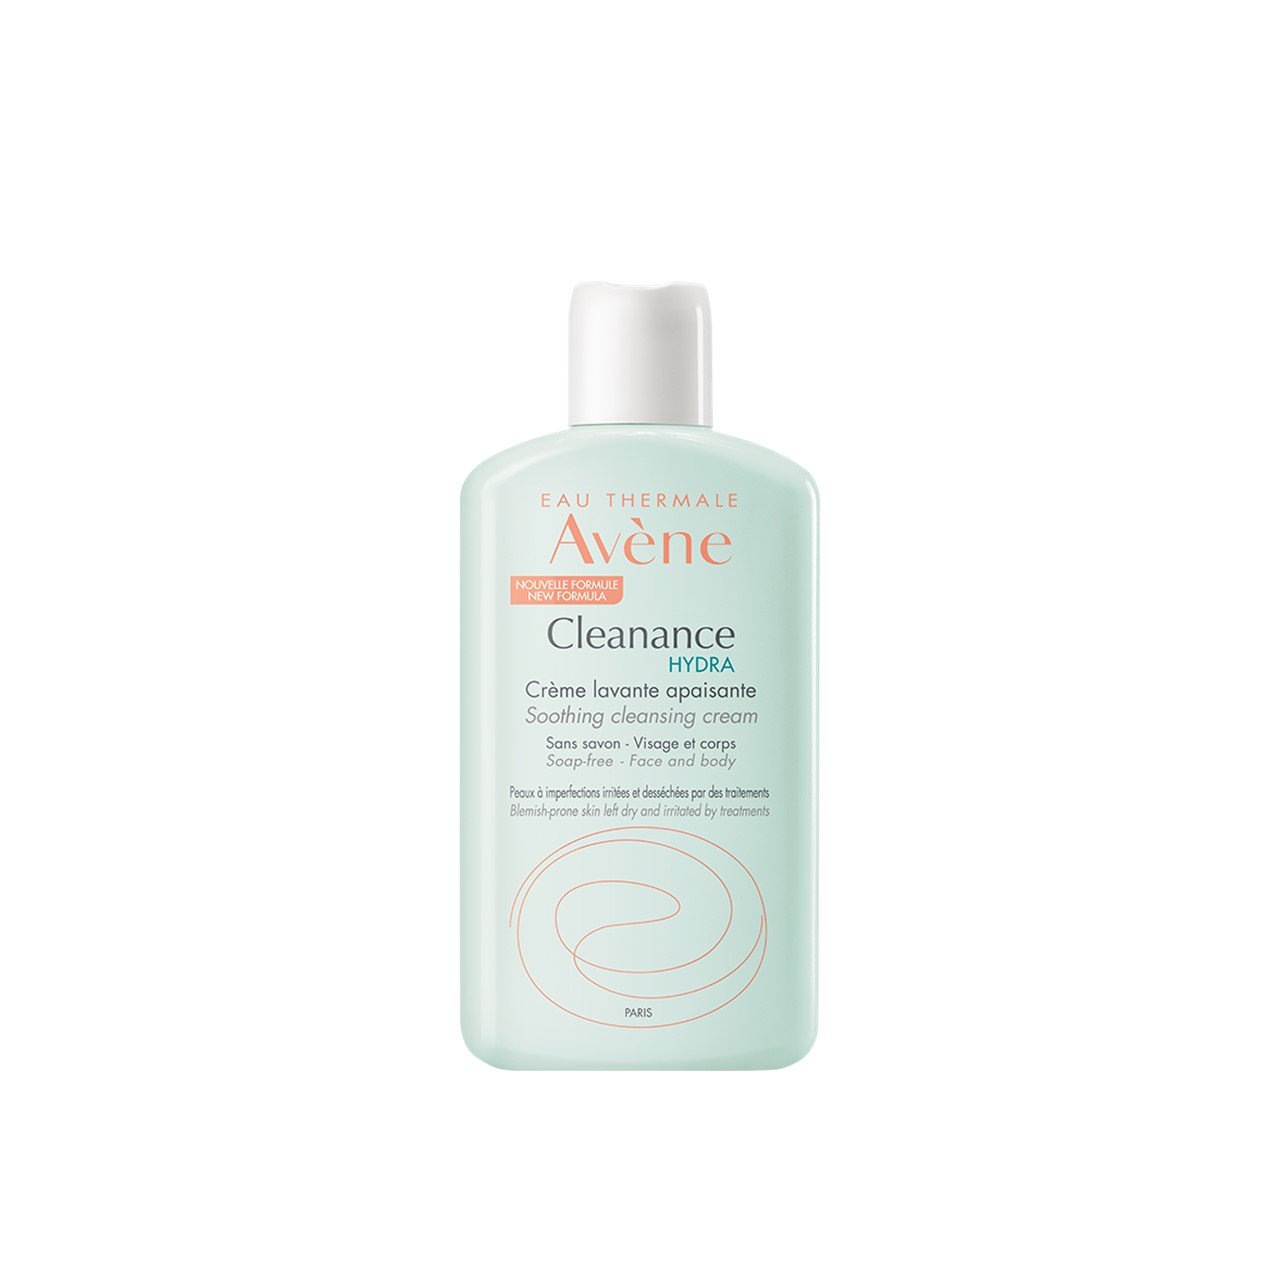 https://static.beautytocare.com/cdn-cgi/image/width=1600,height=1600,f=auto/media/catalog/product//a/v/avene-cleanance-hydra-soothing-cleansing-cream-200ml_1.jpg